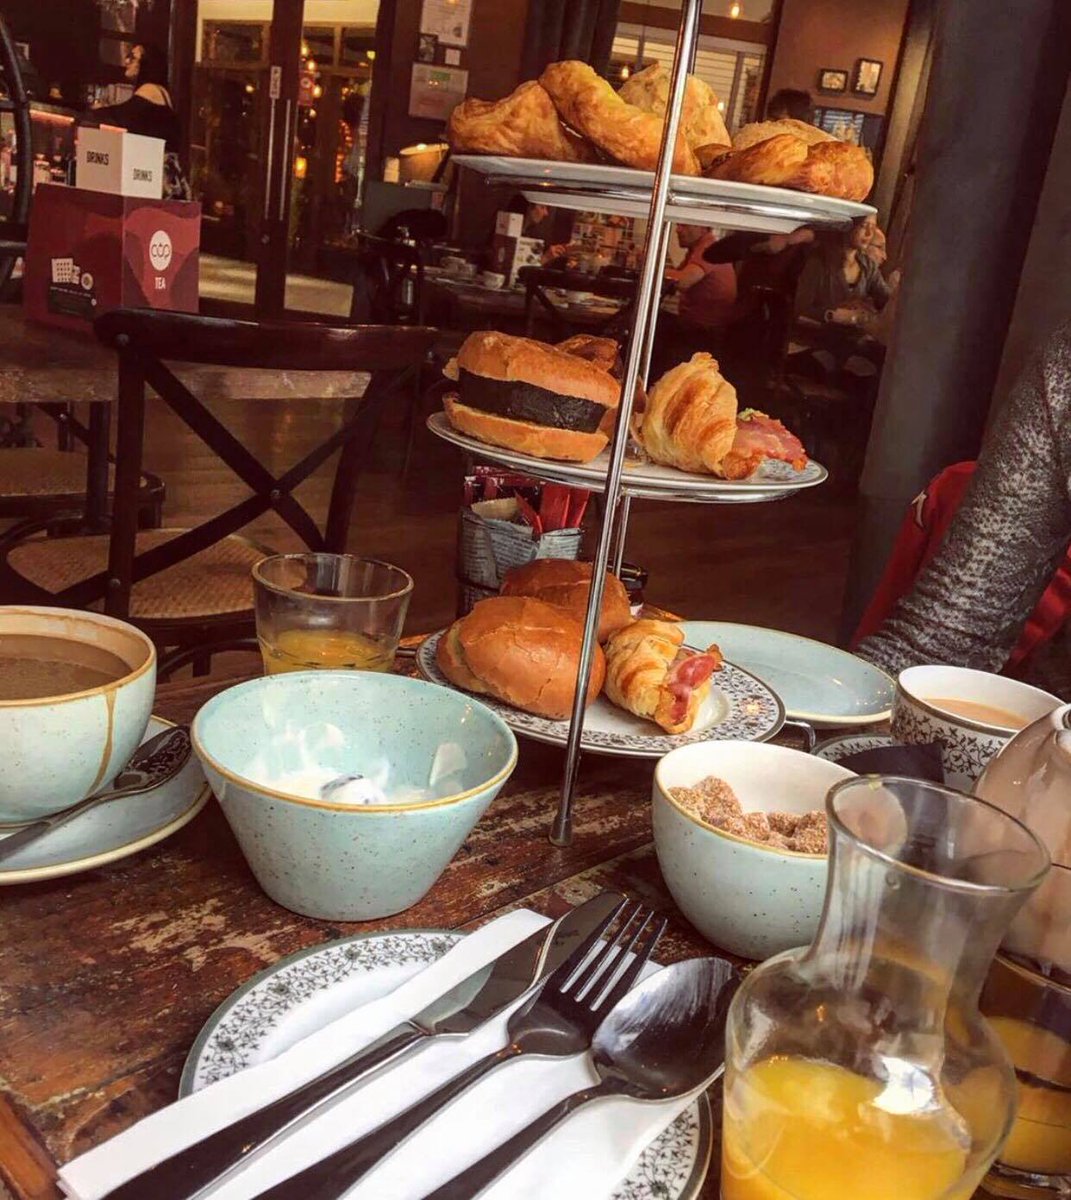 For the ultimate weekend brunch, book in for our morning tea! Breakfast rolls, avocado toast, pastries, scones, fruit, yoghurt, granola, juice and a hot drink all for £29.99 for two people! 🥑🥐☕️ Book at cuptearooms.co.uk/book